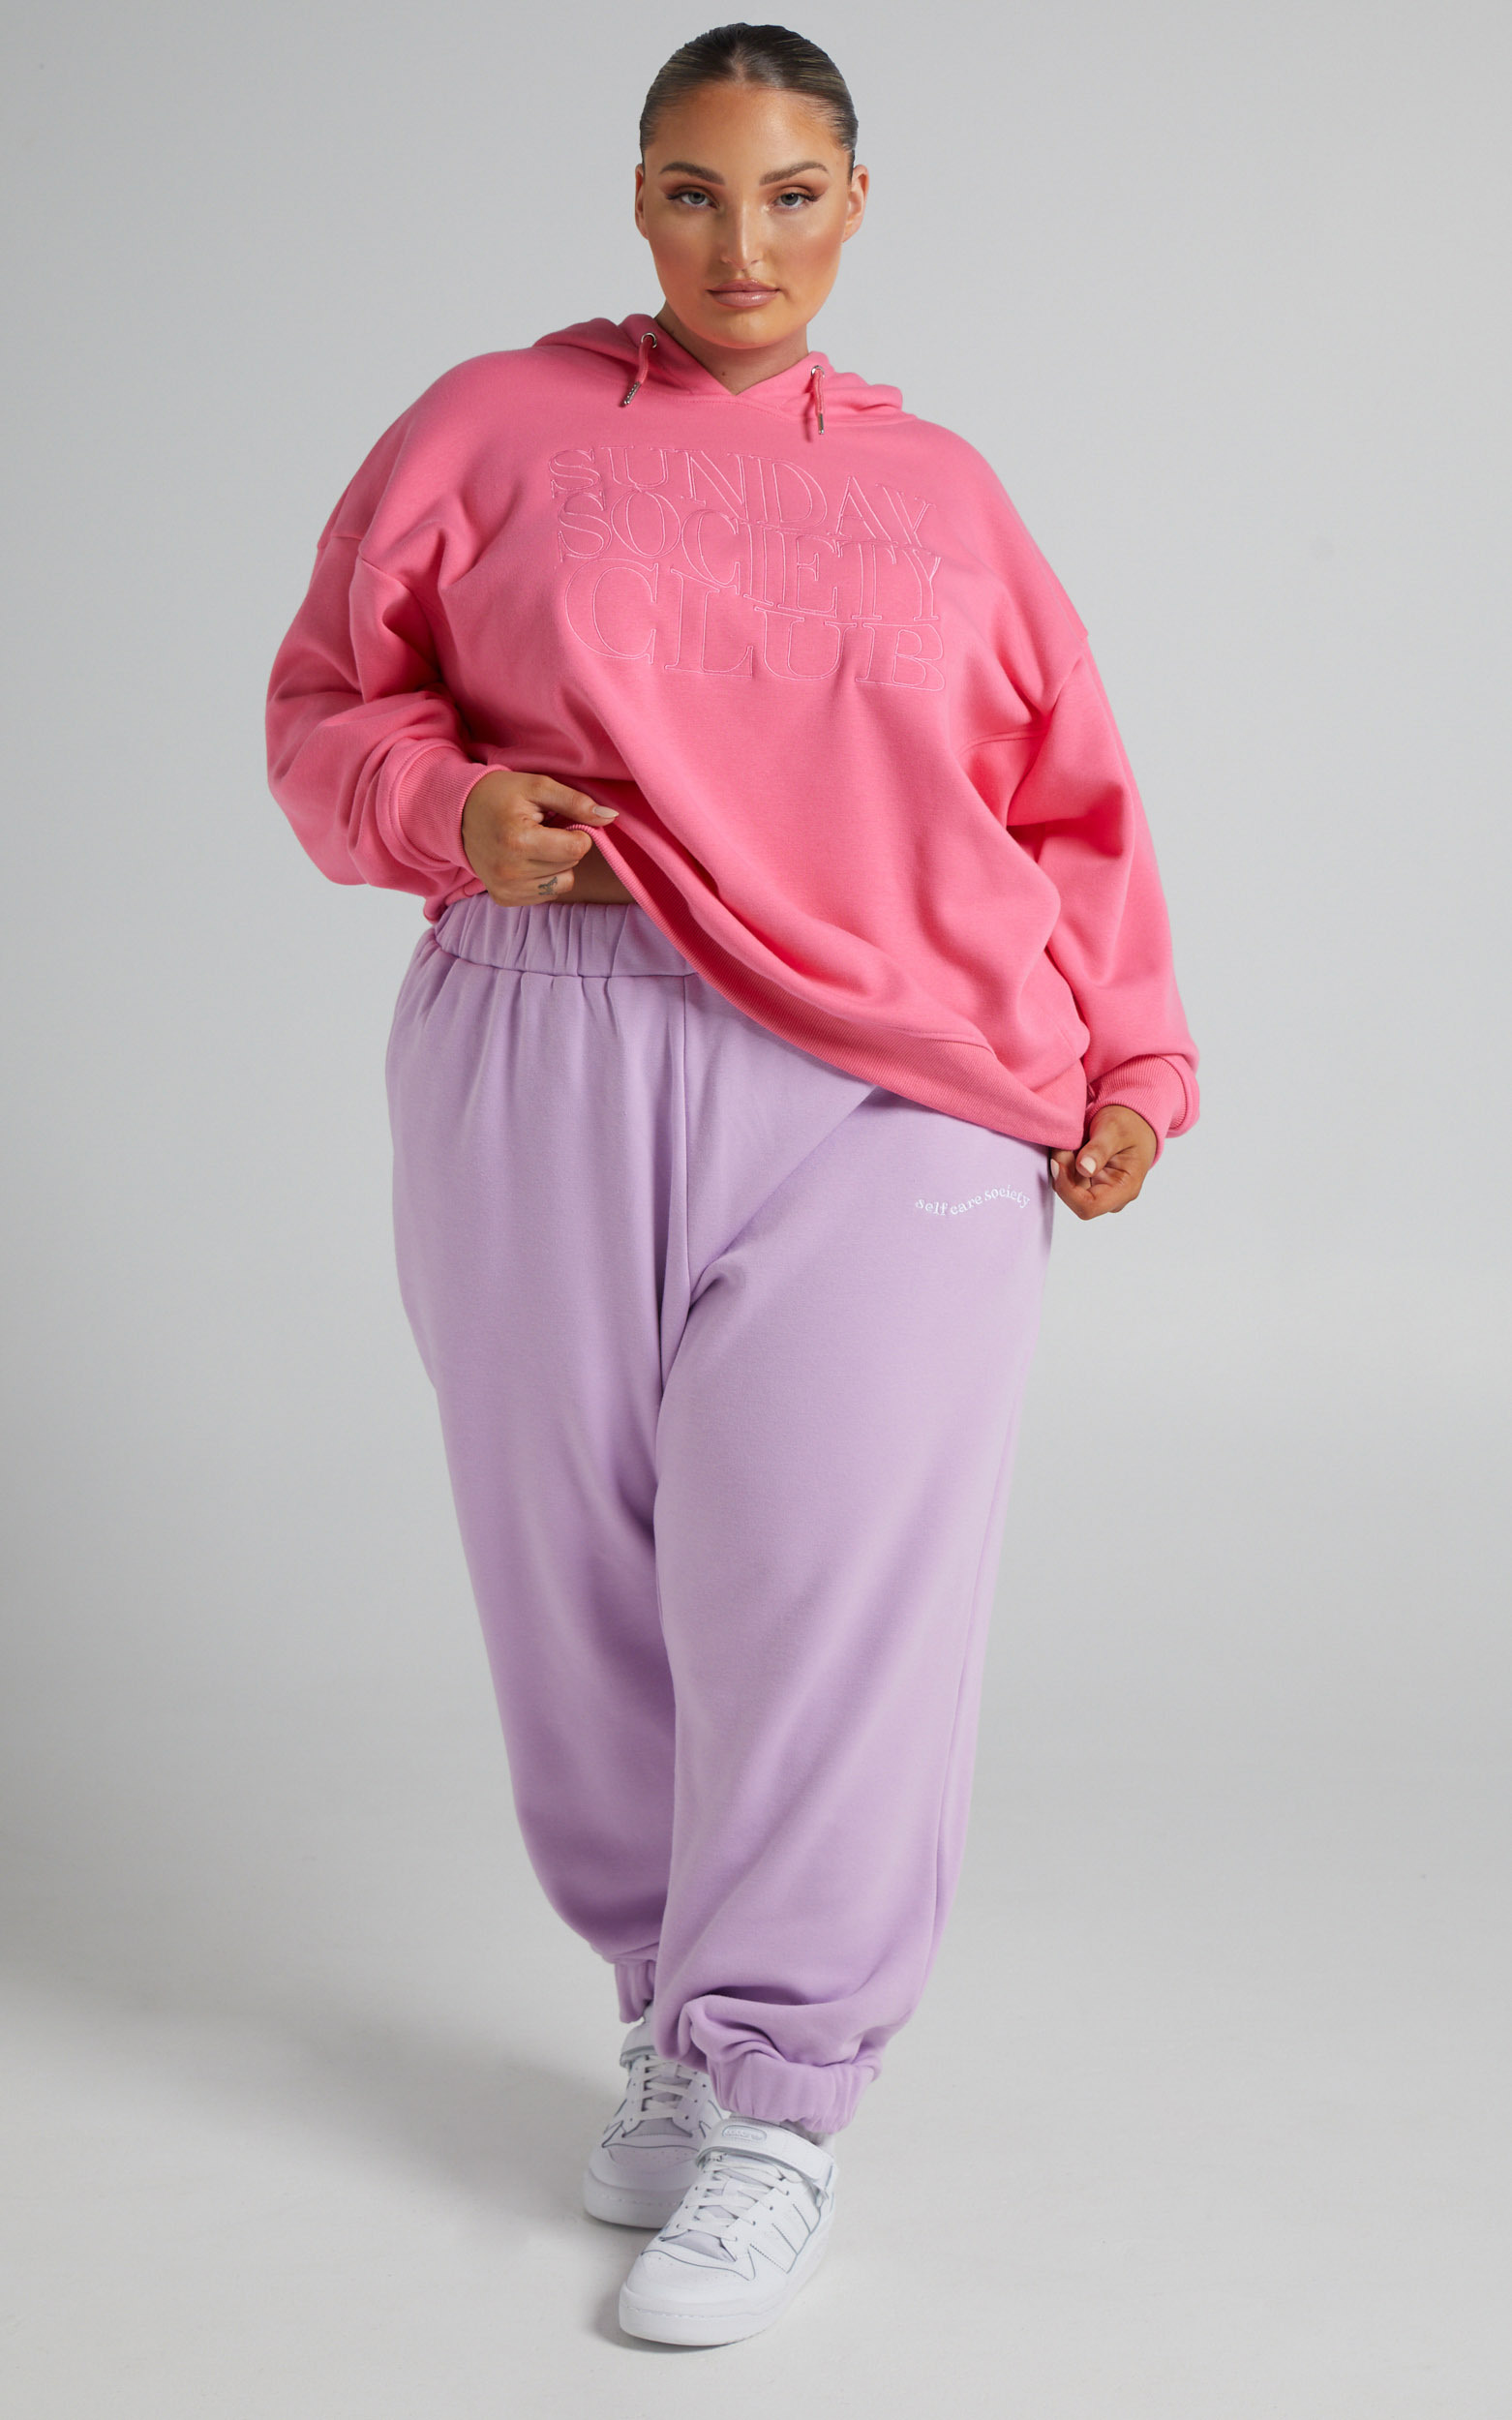 Sunday Society Club - Maddie Sweatpants in Lilac - 06, PRP7, hi-res image number null